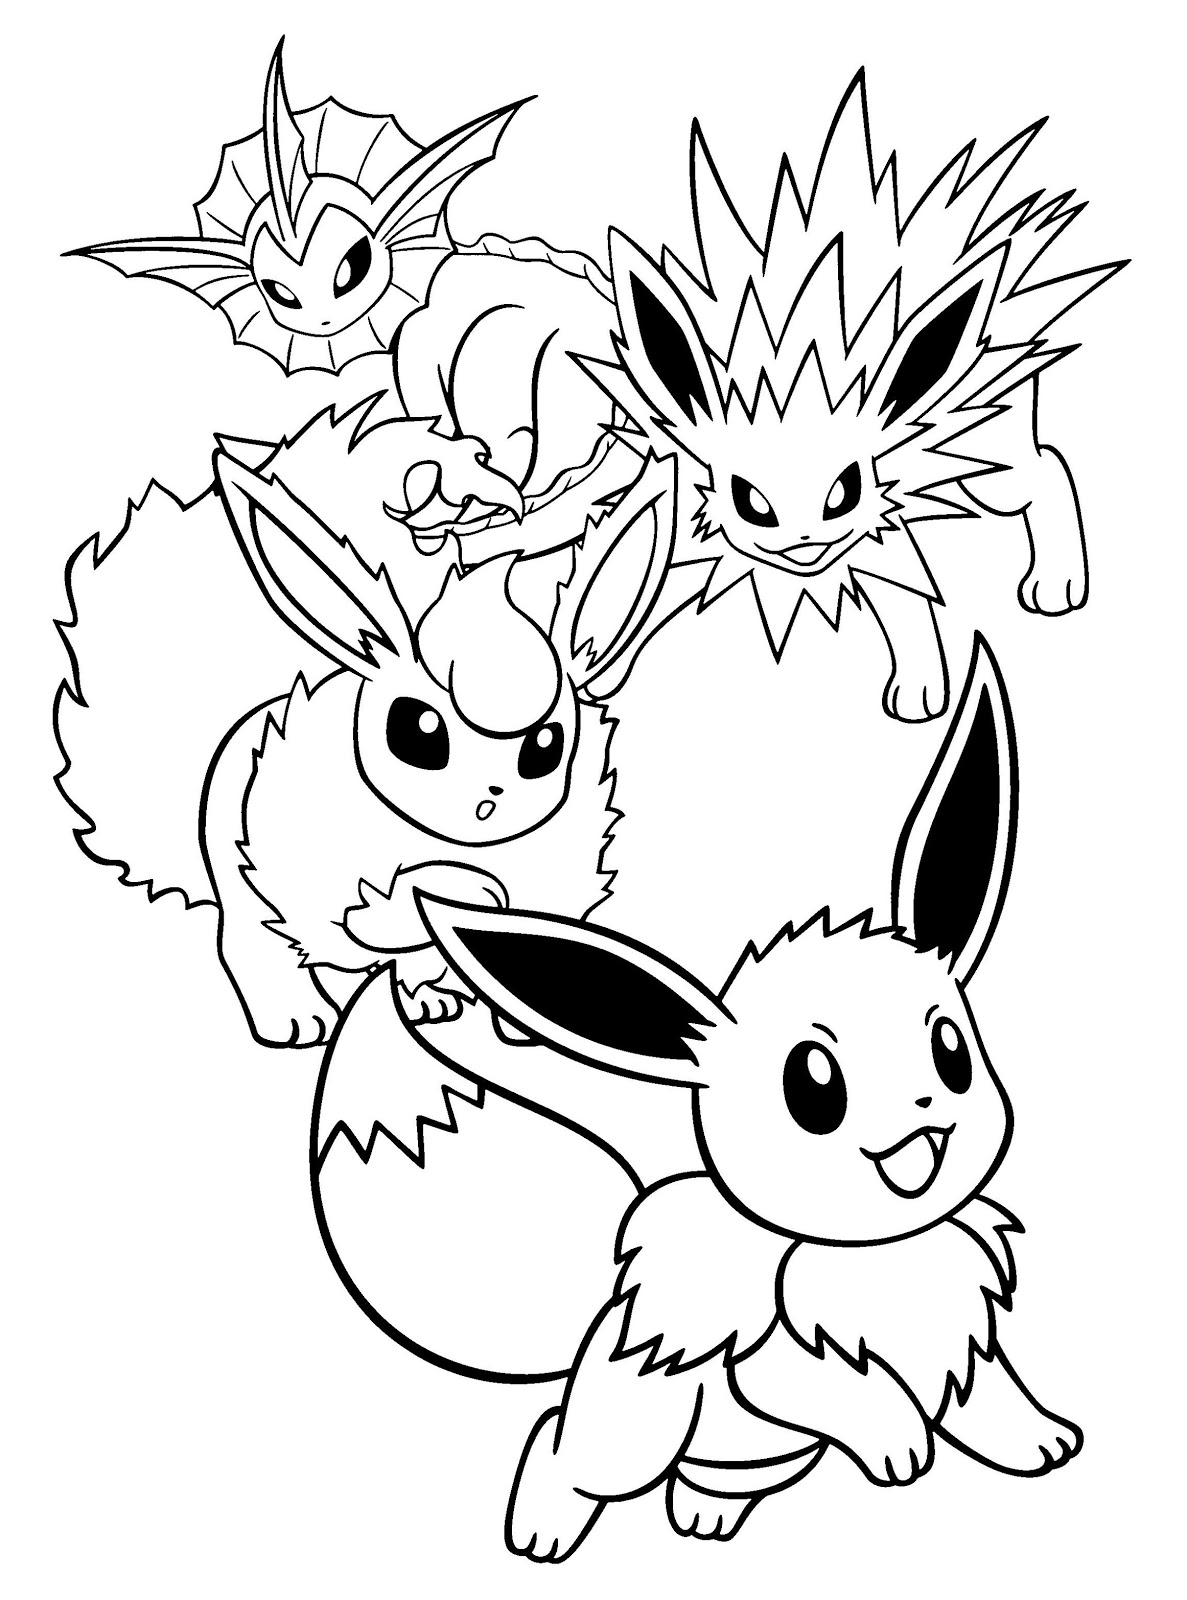 Eevee Coloring Pages Printable - Free Pokemon Coloring Pages